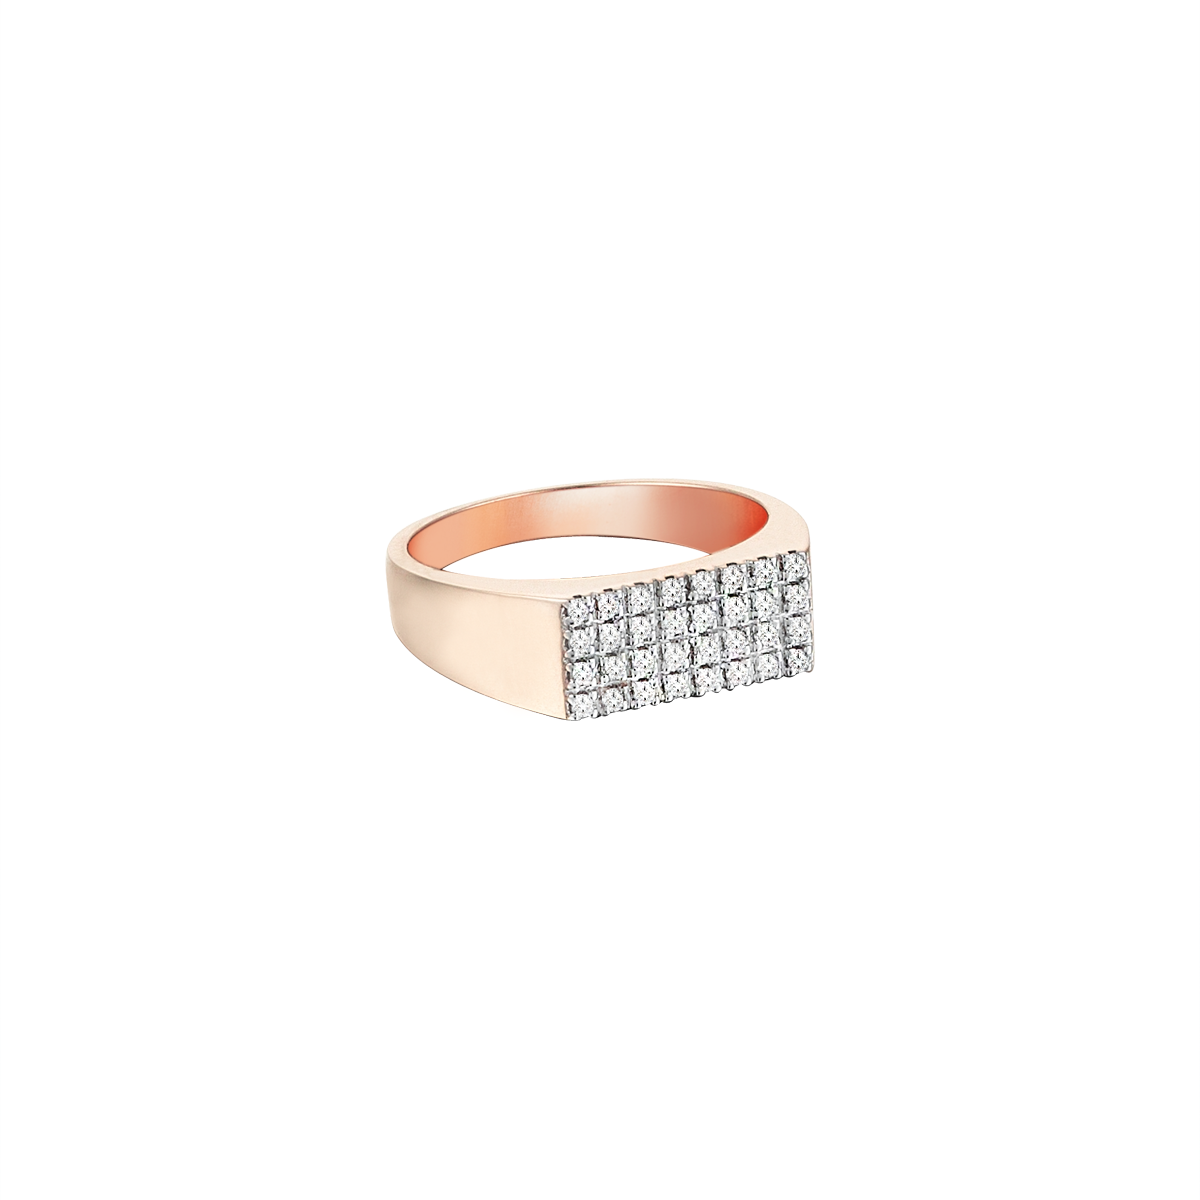 Pave Rectangular Ring in Rose Gold - Her Story Shop